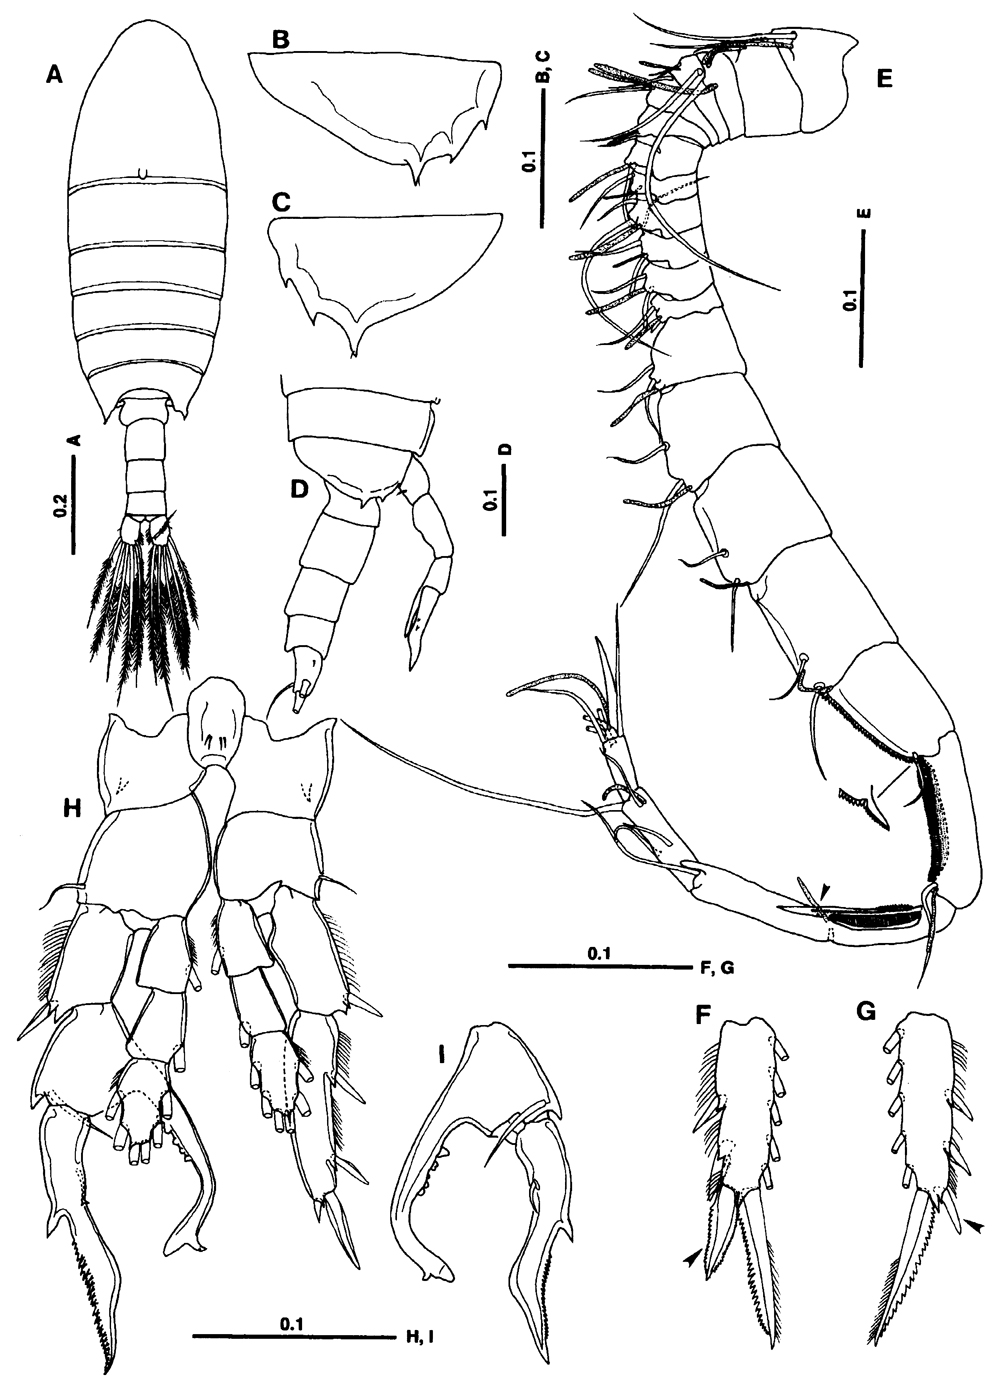 Species Centropages brevifurcus - Plate 7 of morphological figures